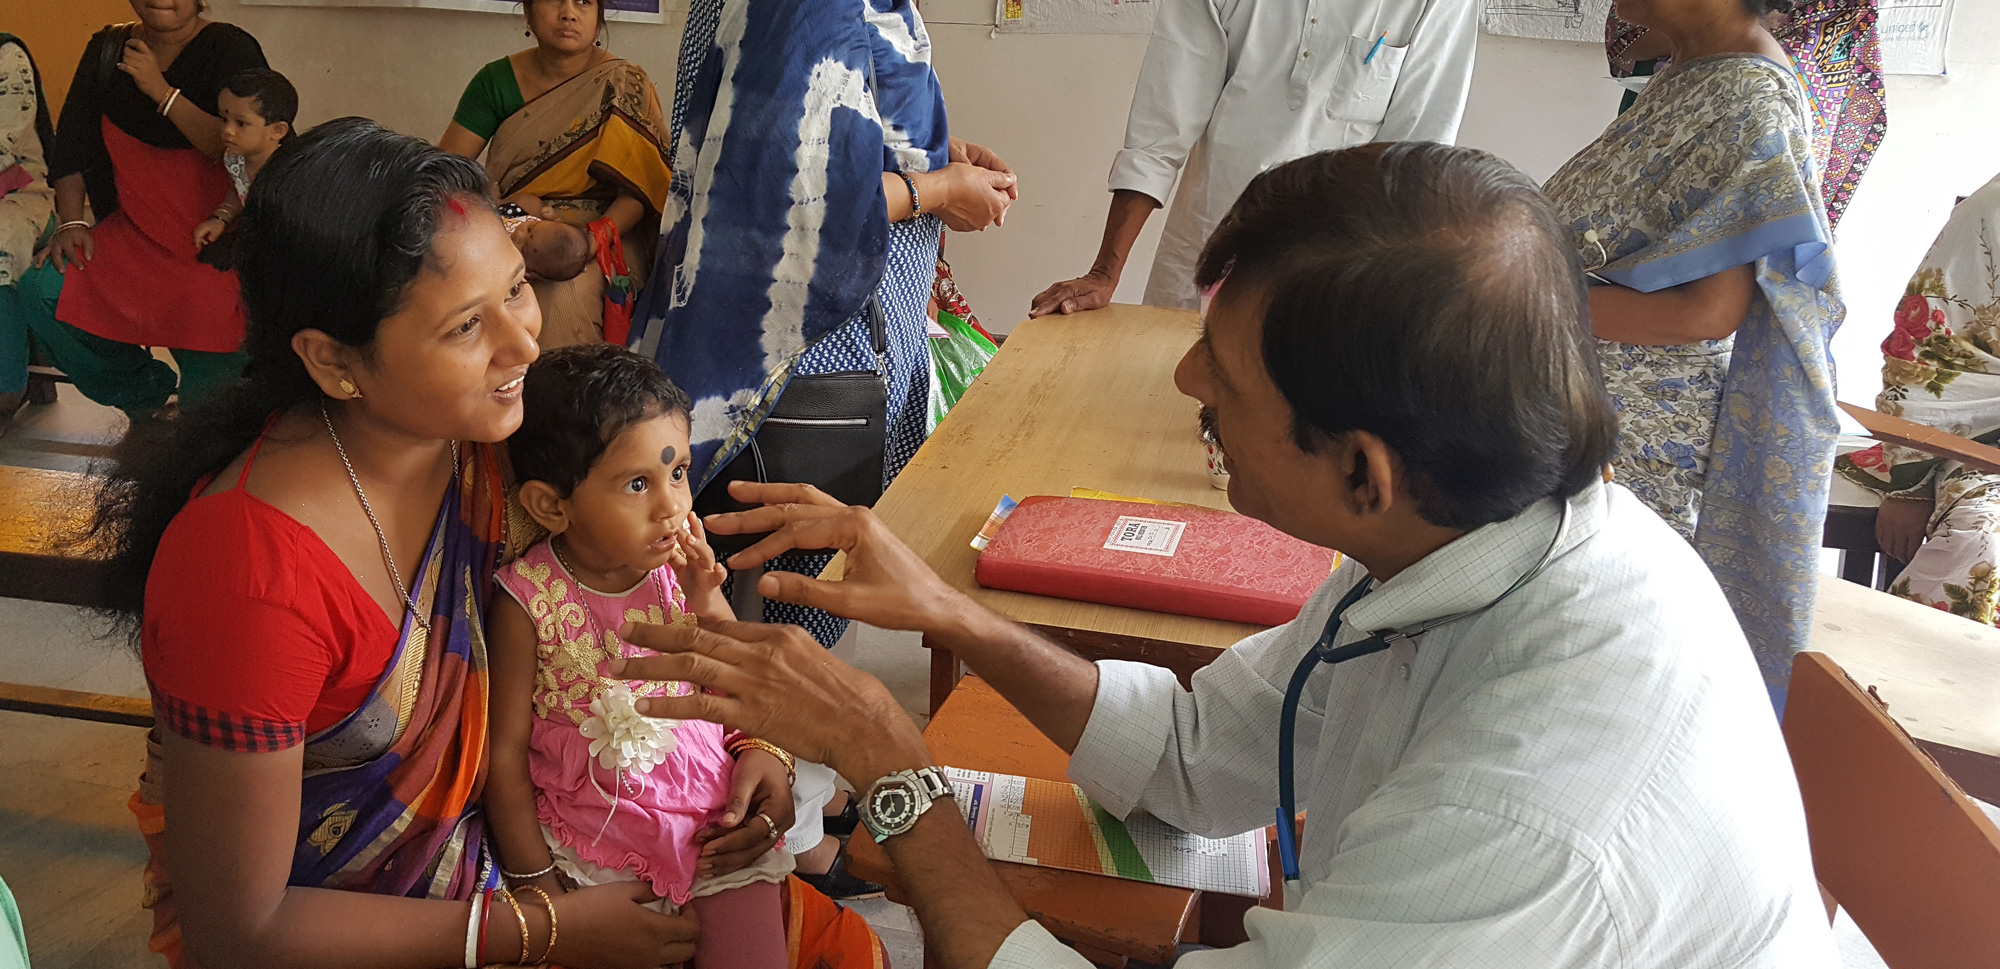 Adequate health services are concentrated mainly in urban areas, with a gross lack of infrastructure in rural India.